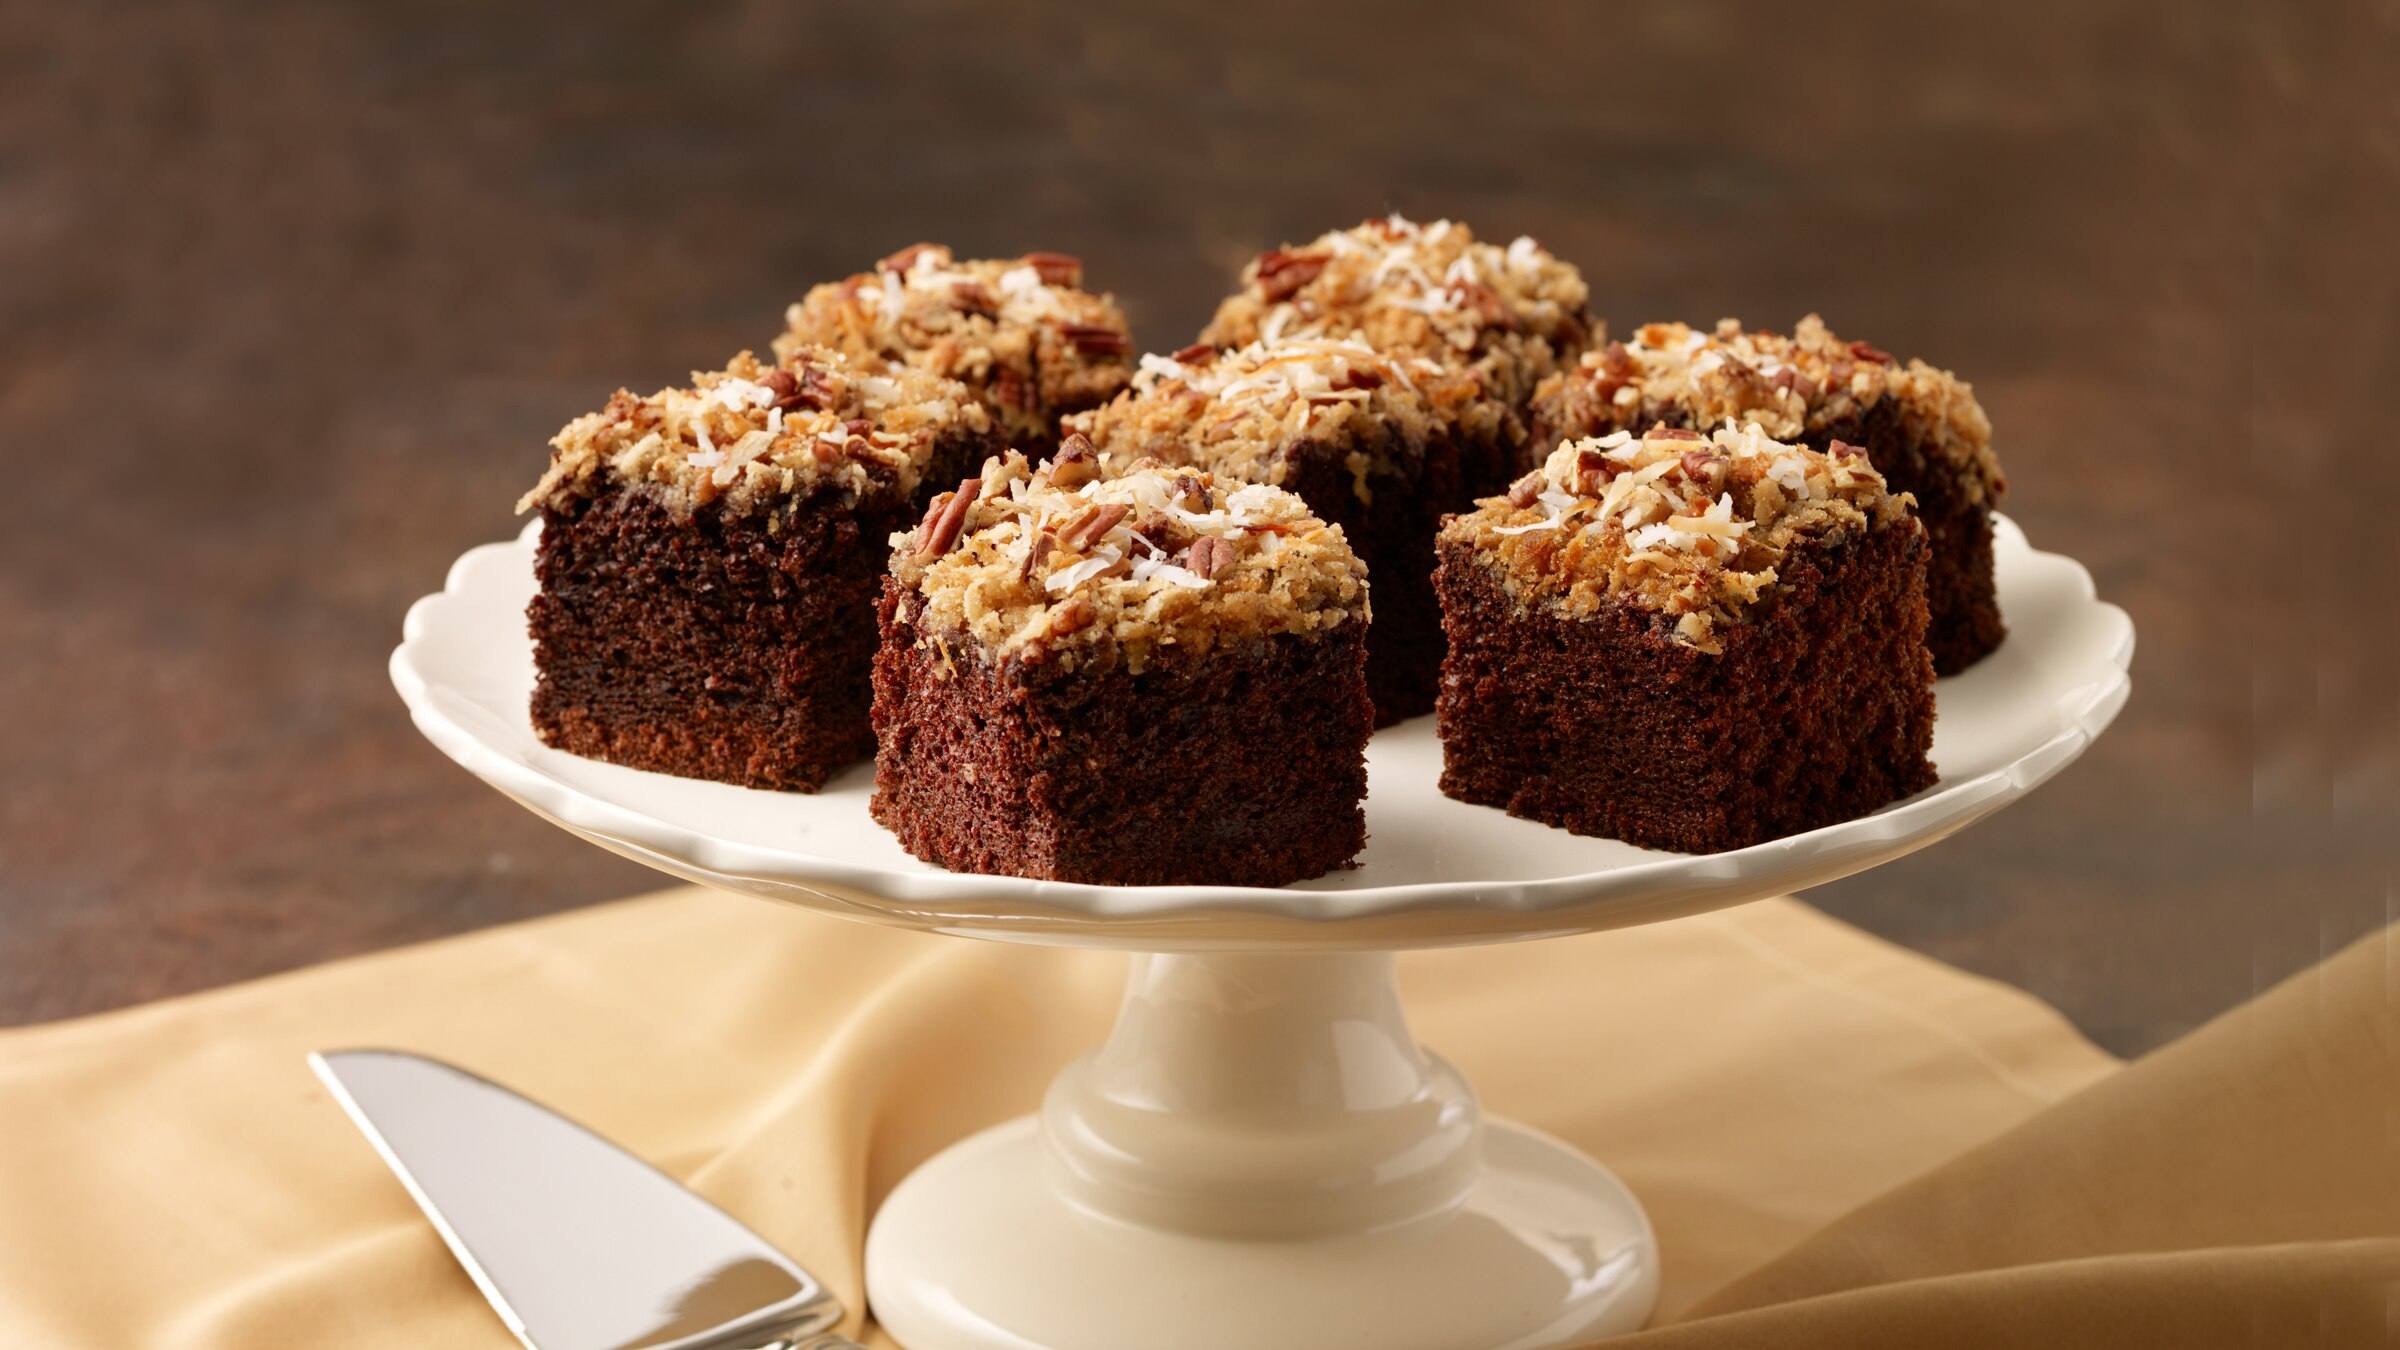 Pecan Coconut Topped Chocolate Cake